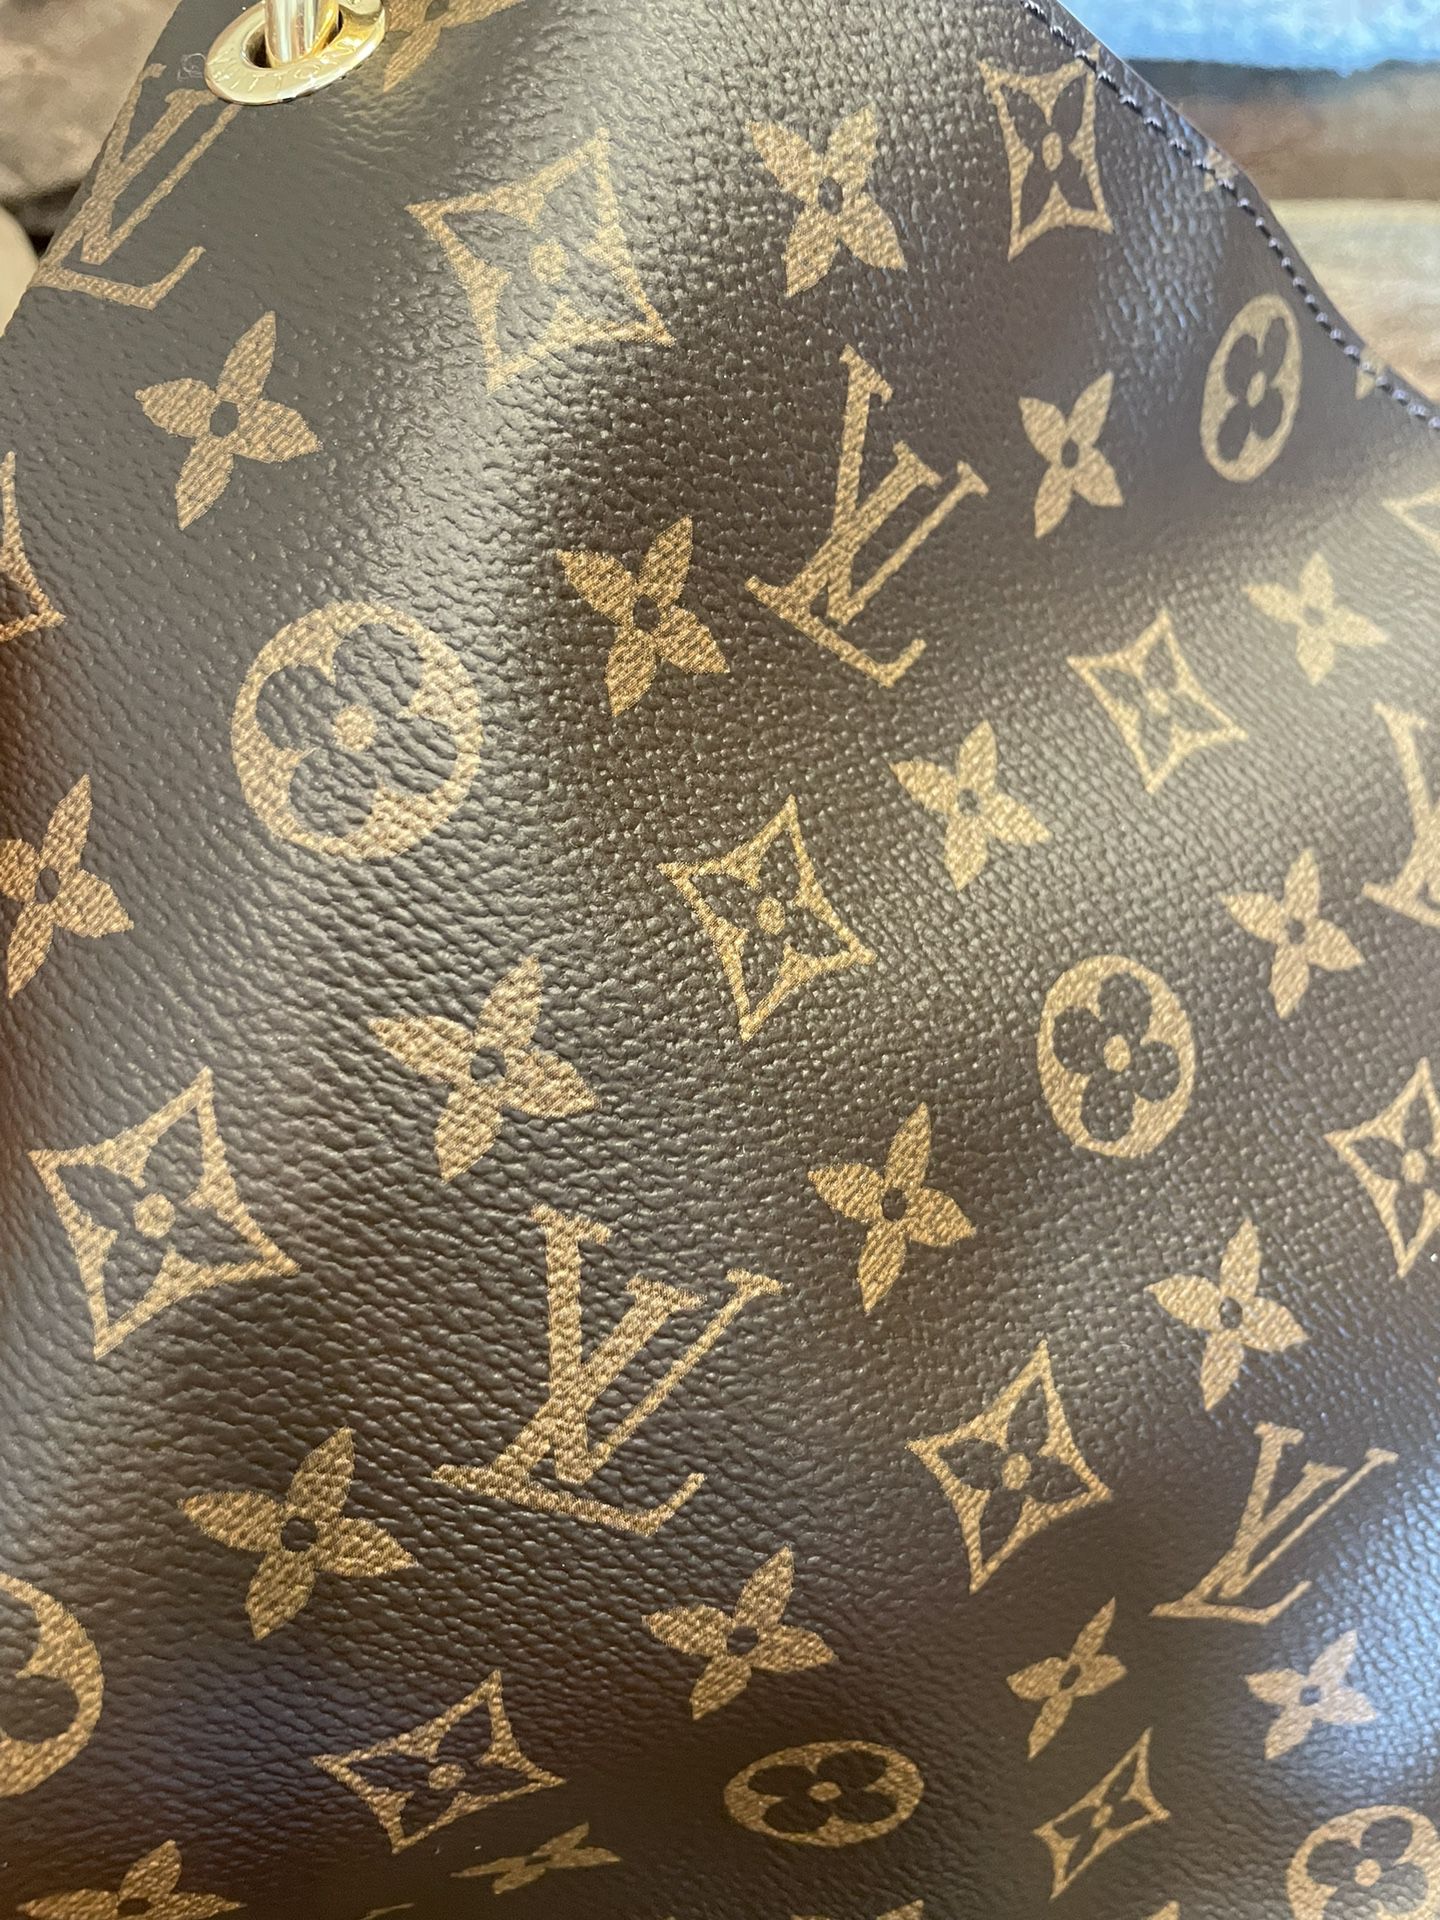 Discontinued authentic Louis vuitton drouot bag for Sale in Santa Clara, CA  - OfferUp